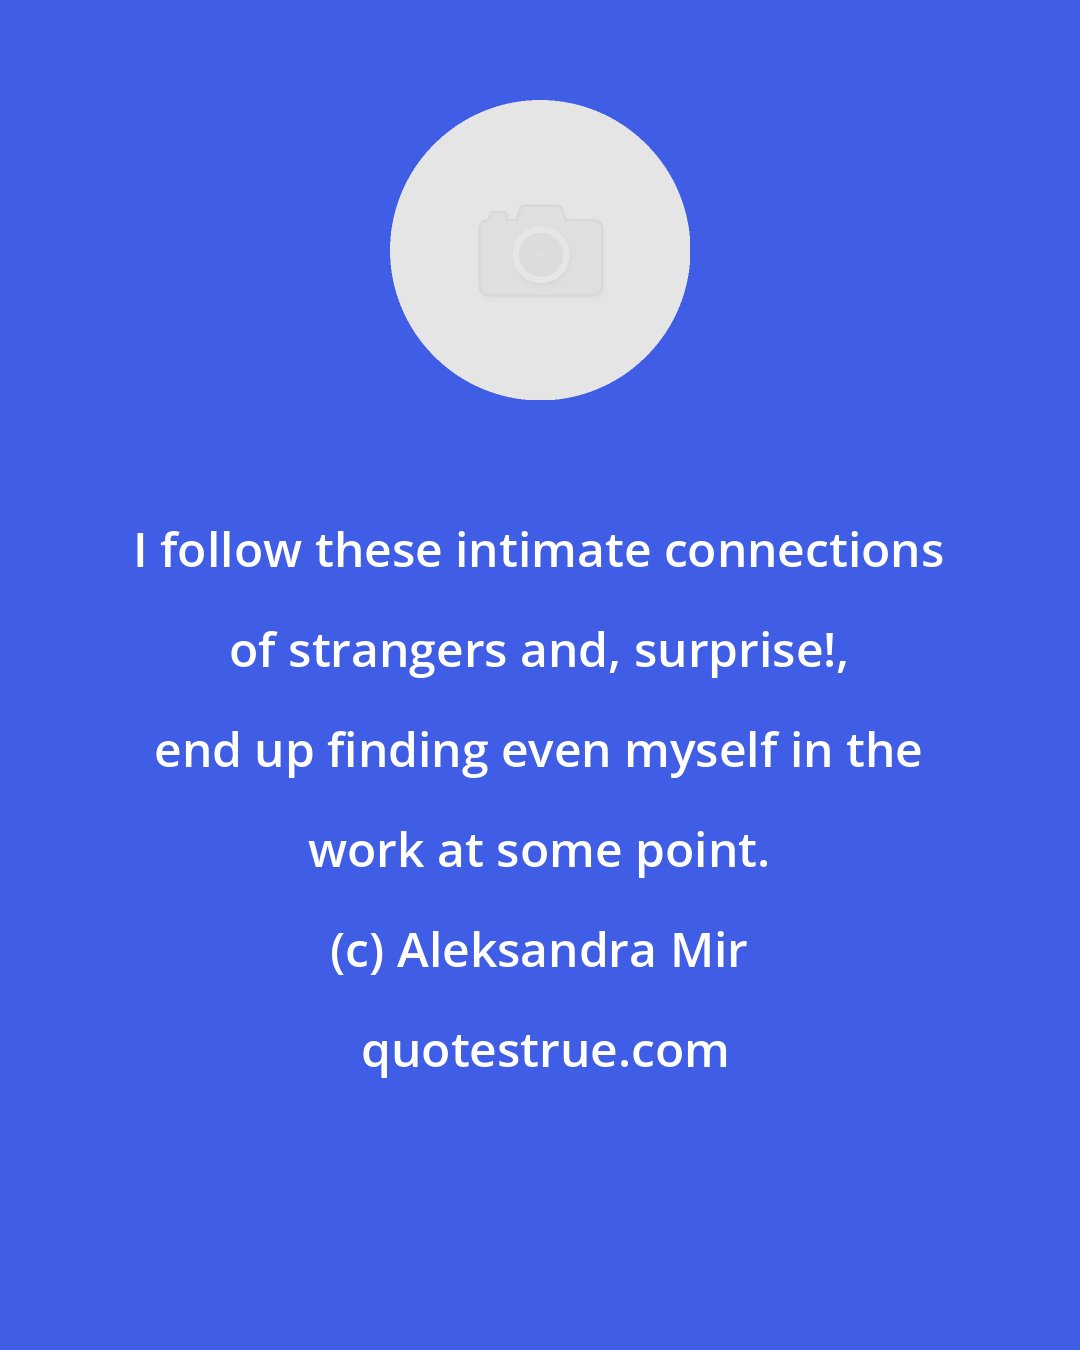 Aleksandra Mir: I follow these intimate connections of strangers and, surprise!, end up finding even myself in the work at some point.